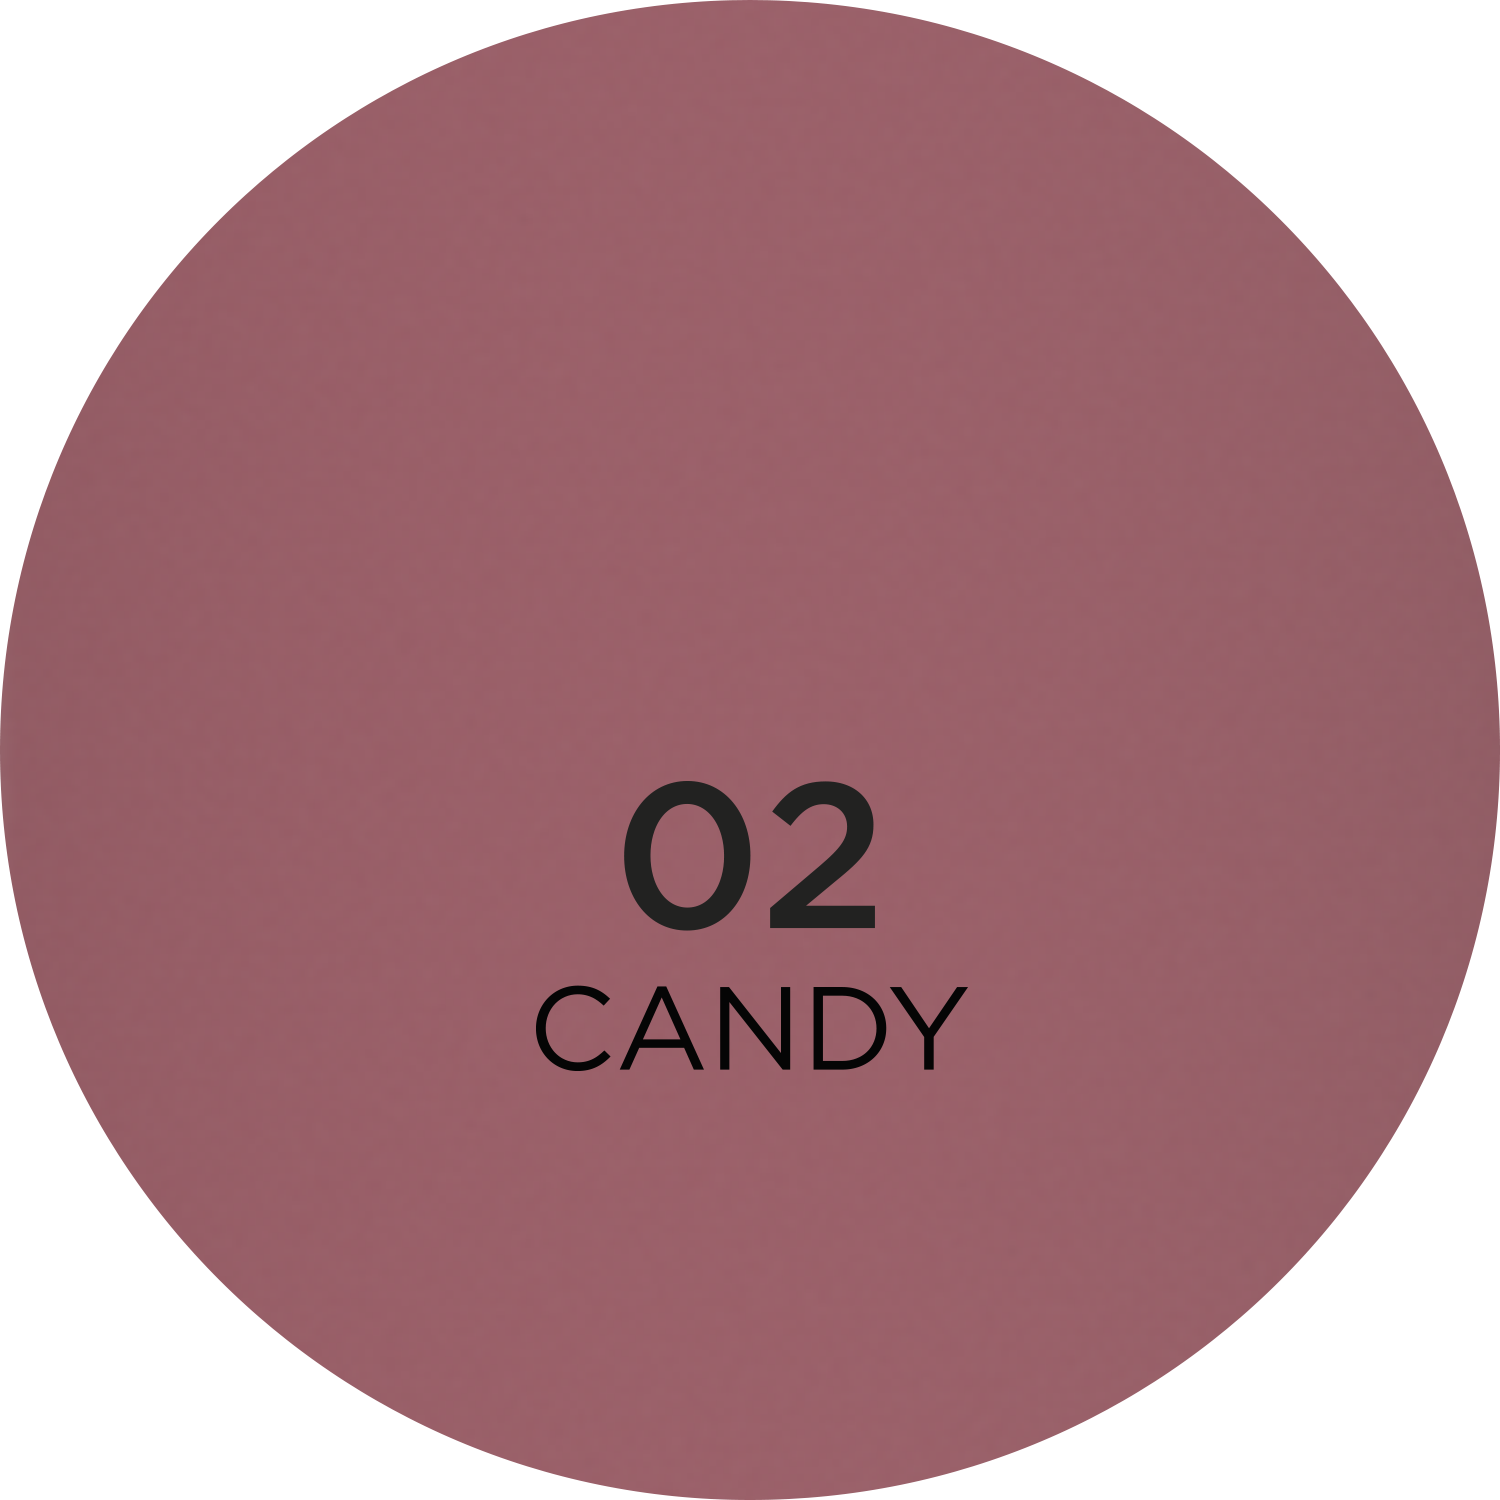 02 Candy